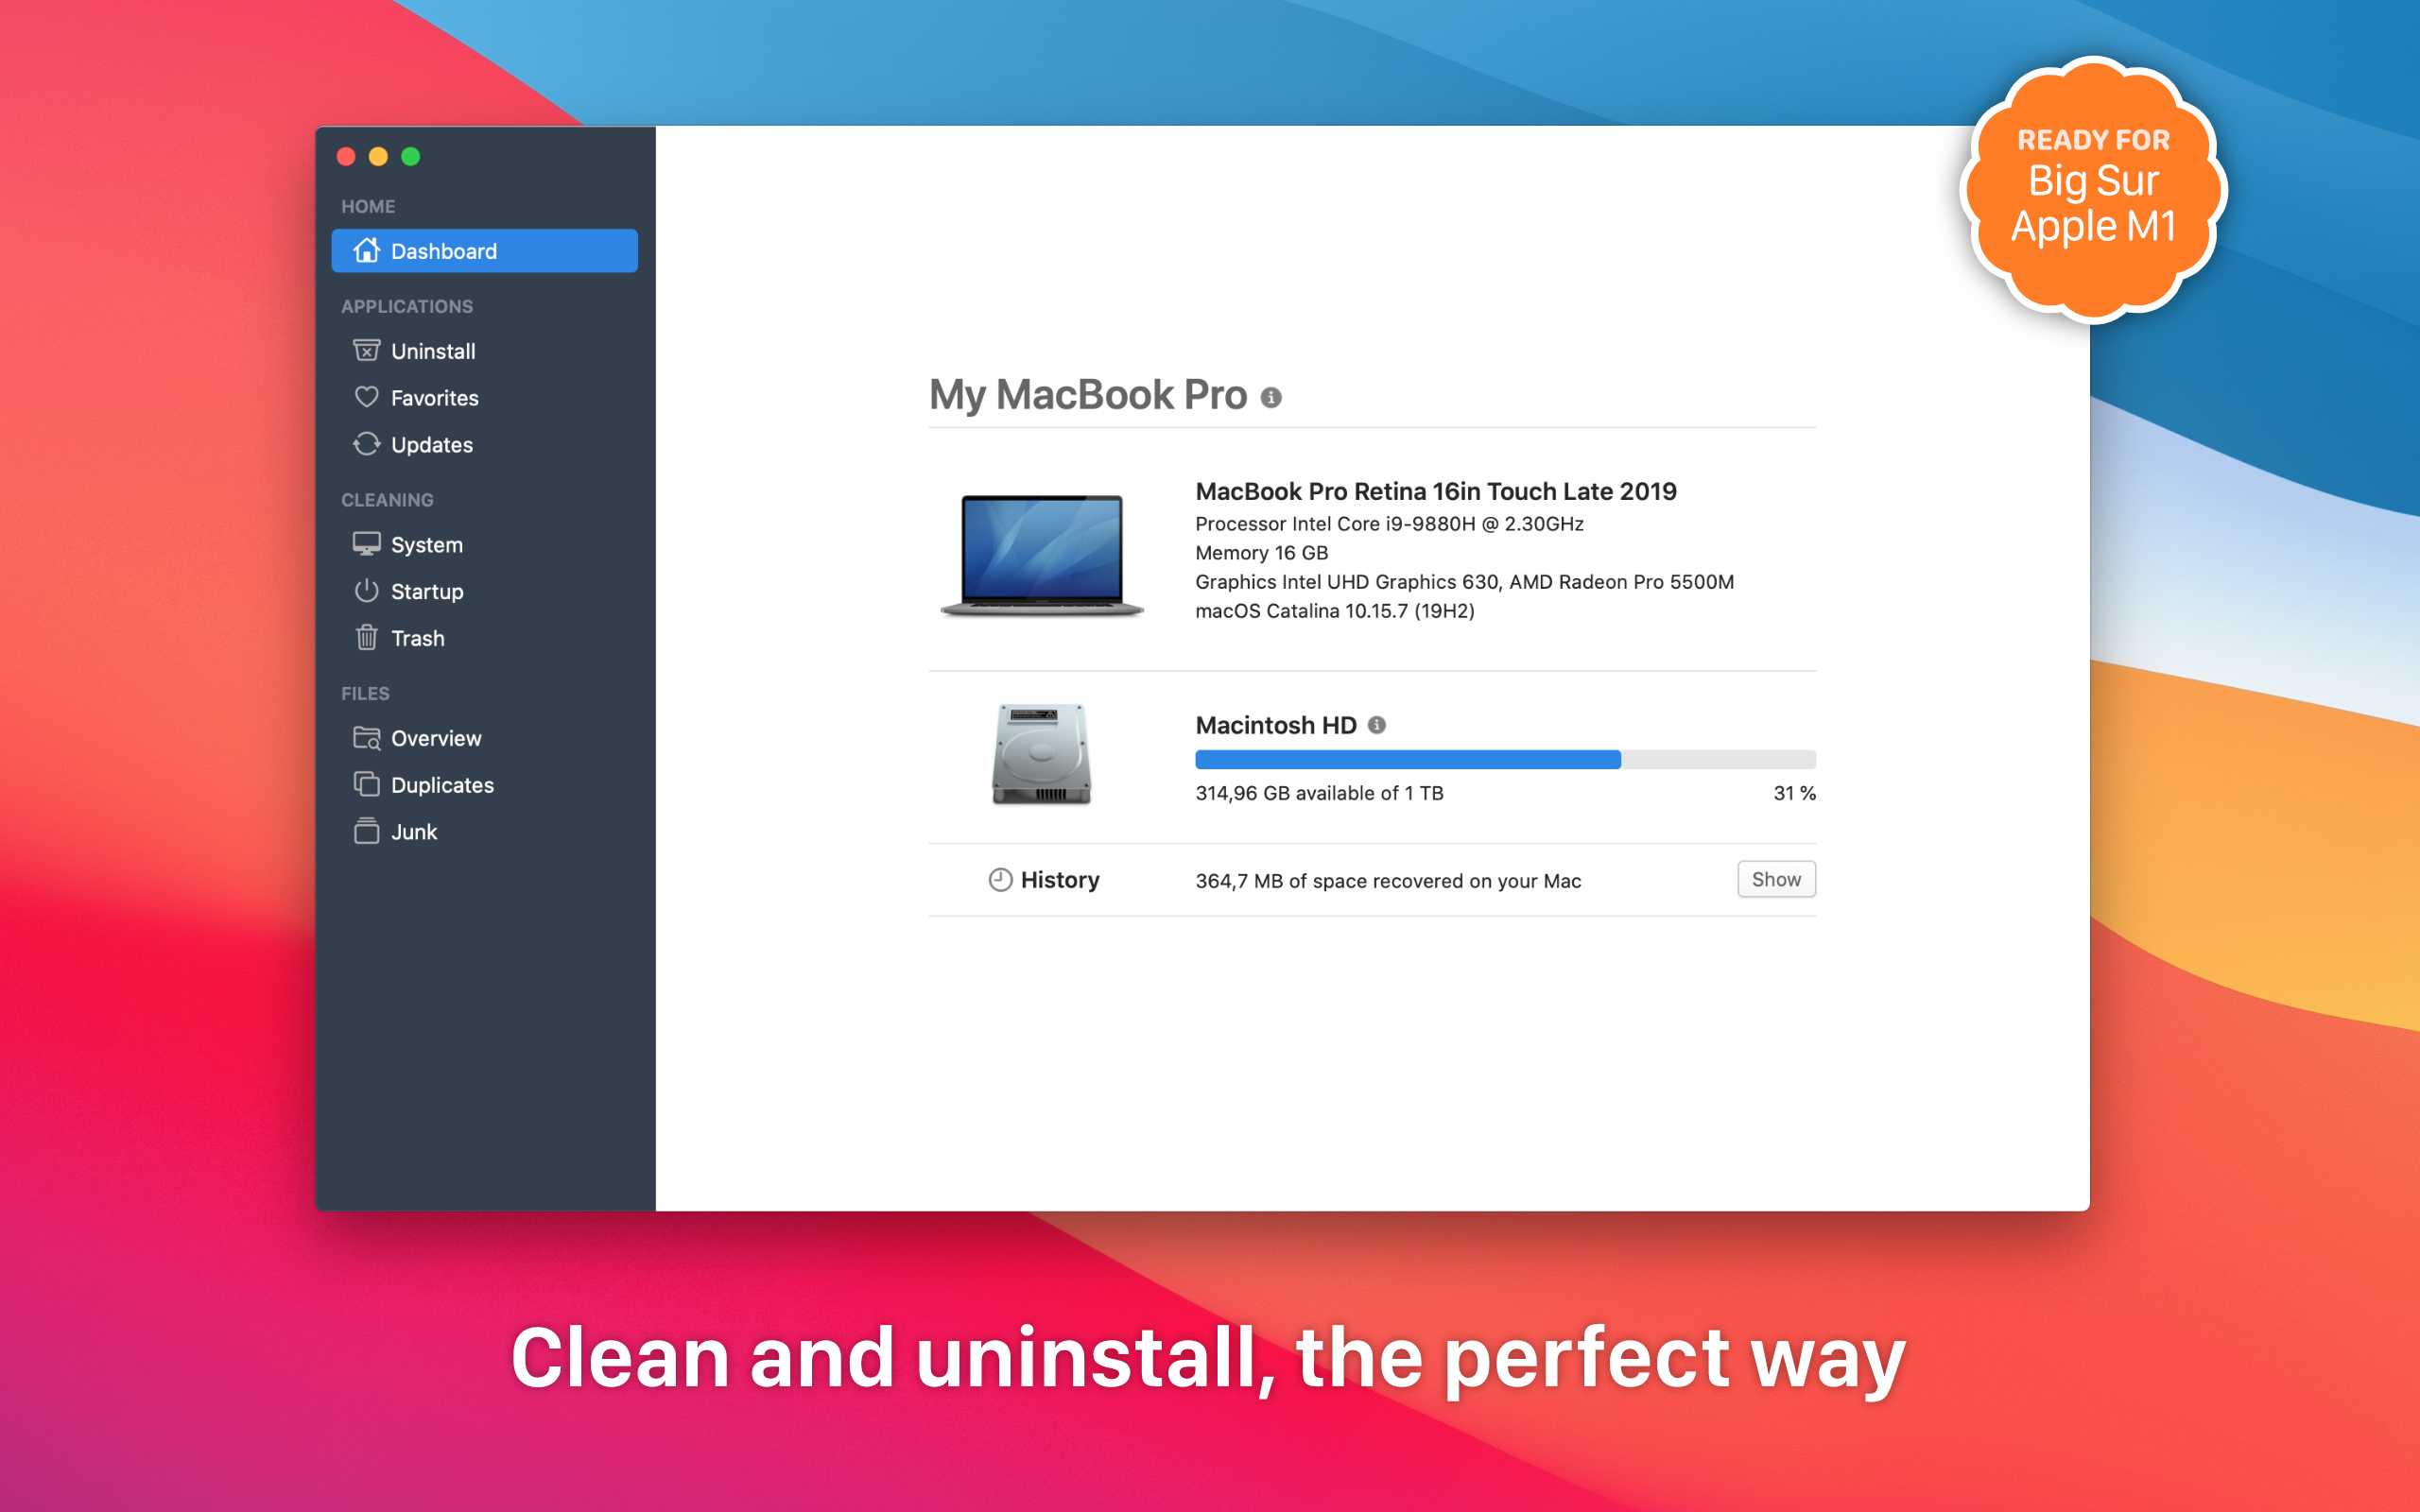 mac app cleaner and uninstaller time machine